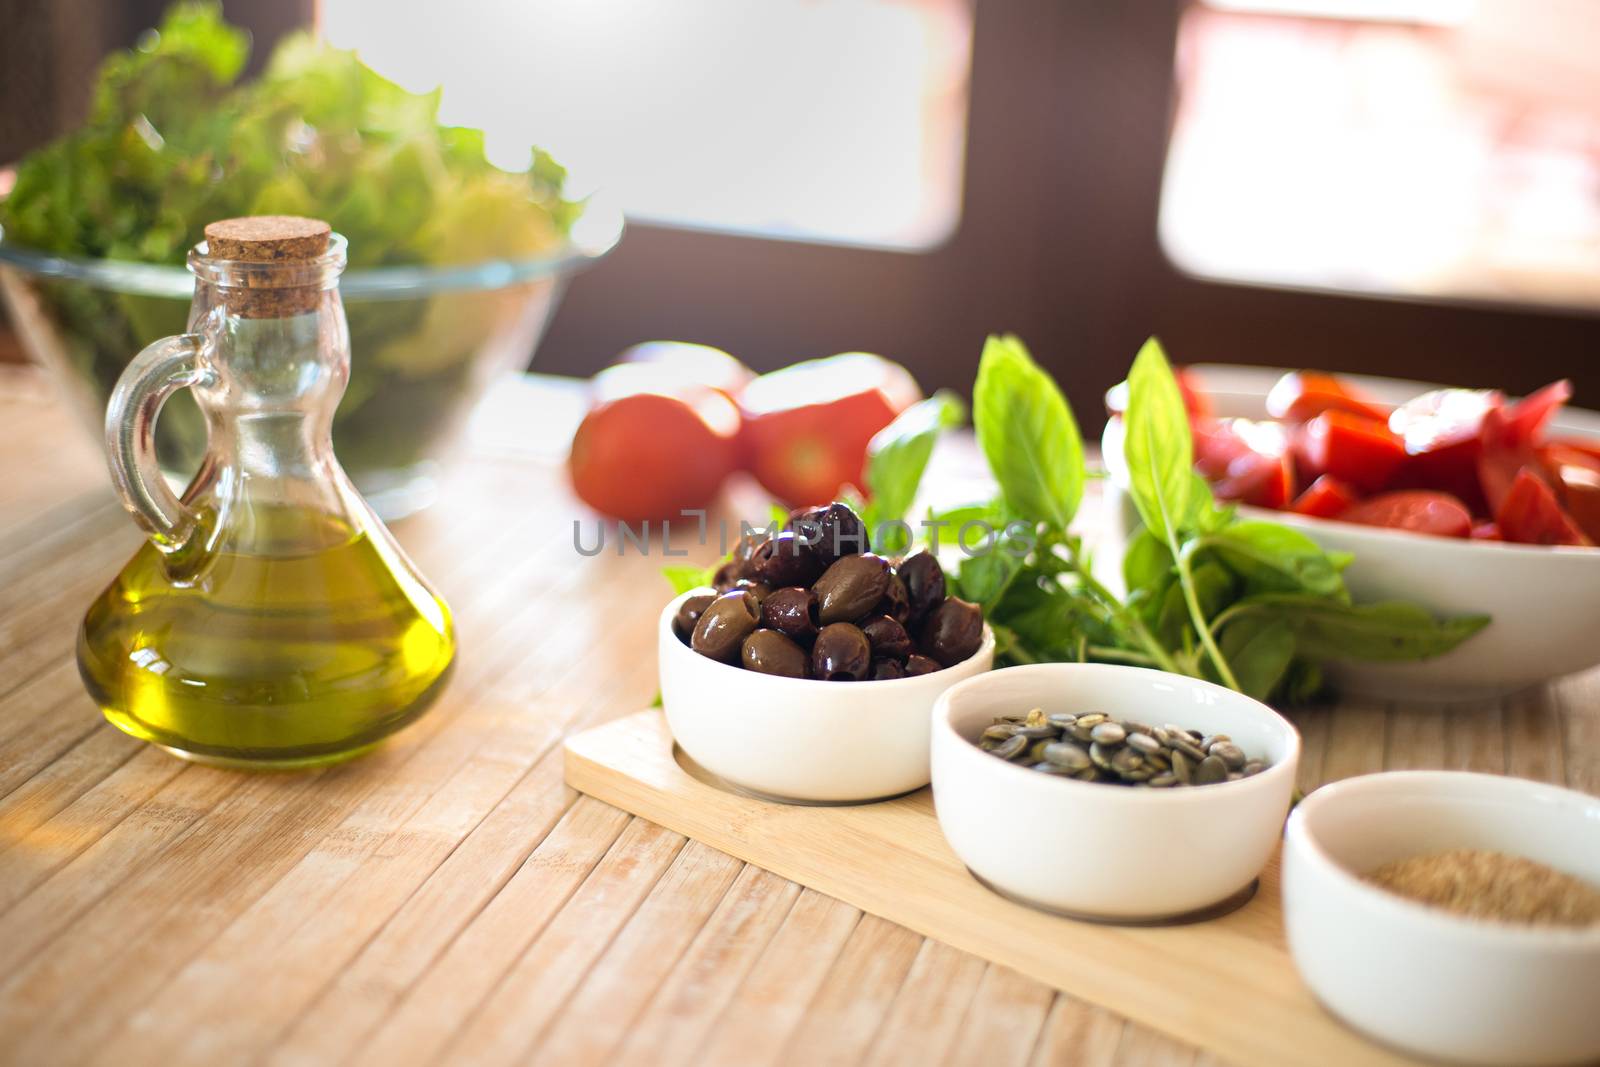 Extra virgin olive oil and olives in the foreground with fresh vegetables and sunlight in the background - Mediterranean diet concept - Healthy summer food concept by robbyfontanesi